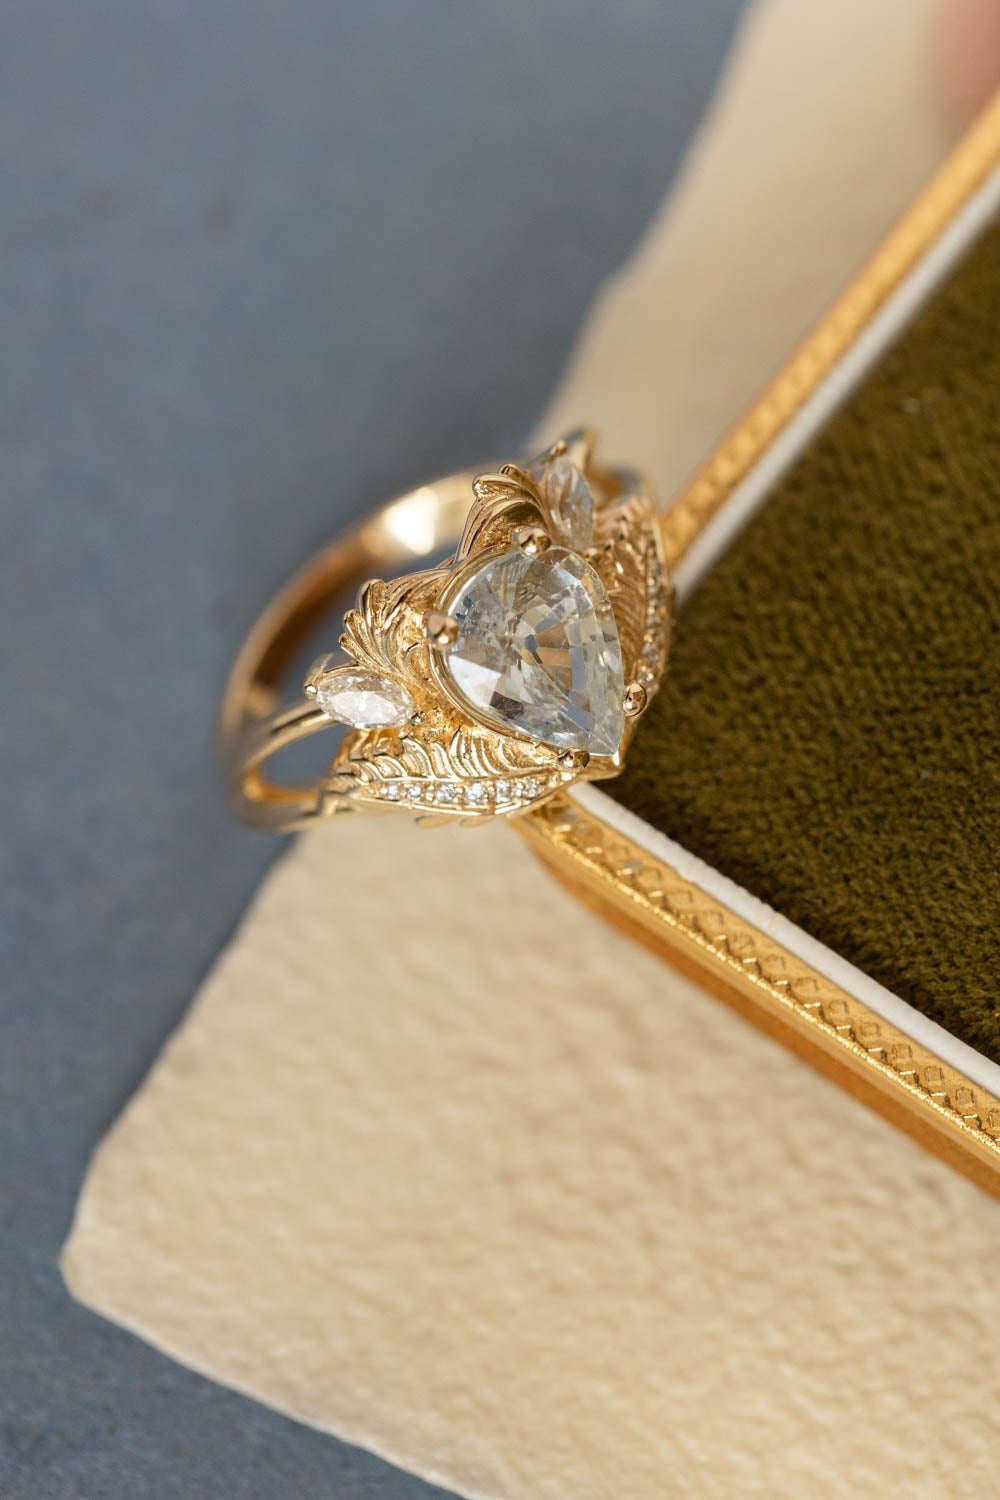 White sapphire engagement ring, gold nature themed proposal ring / Adonis - Eden Garden Jewelry™